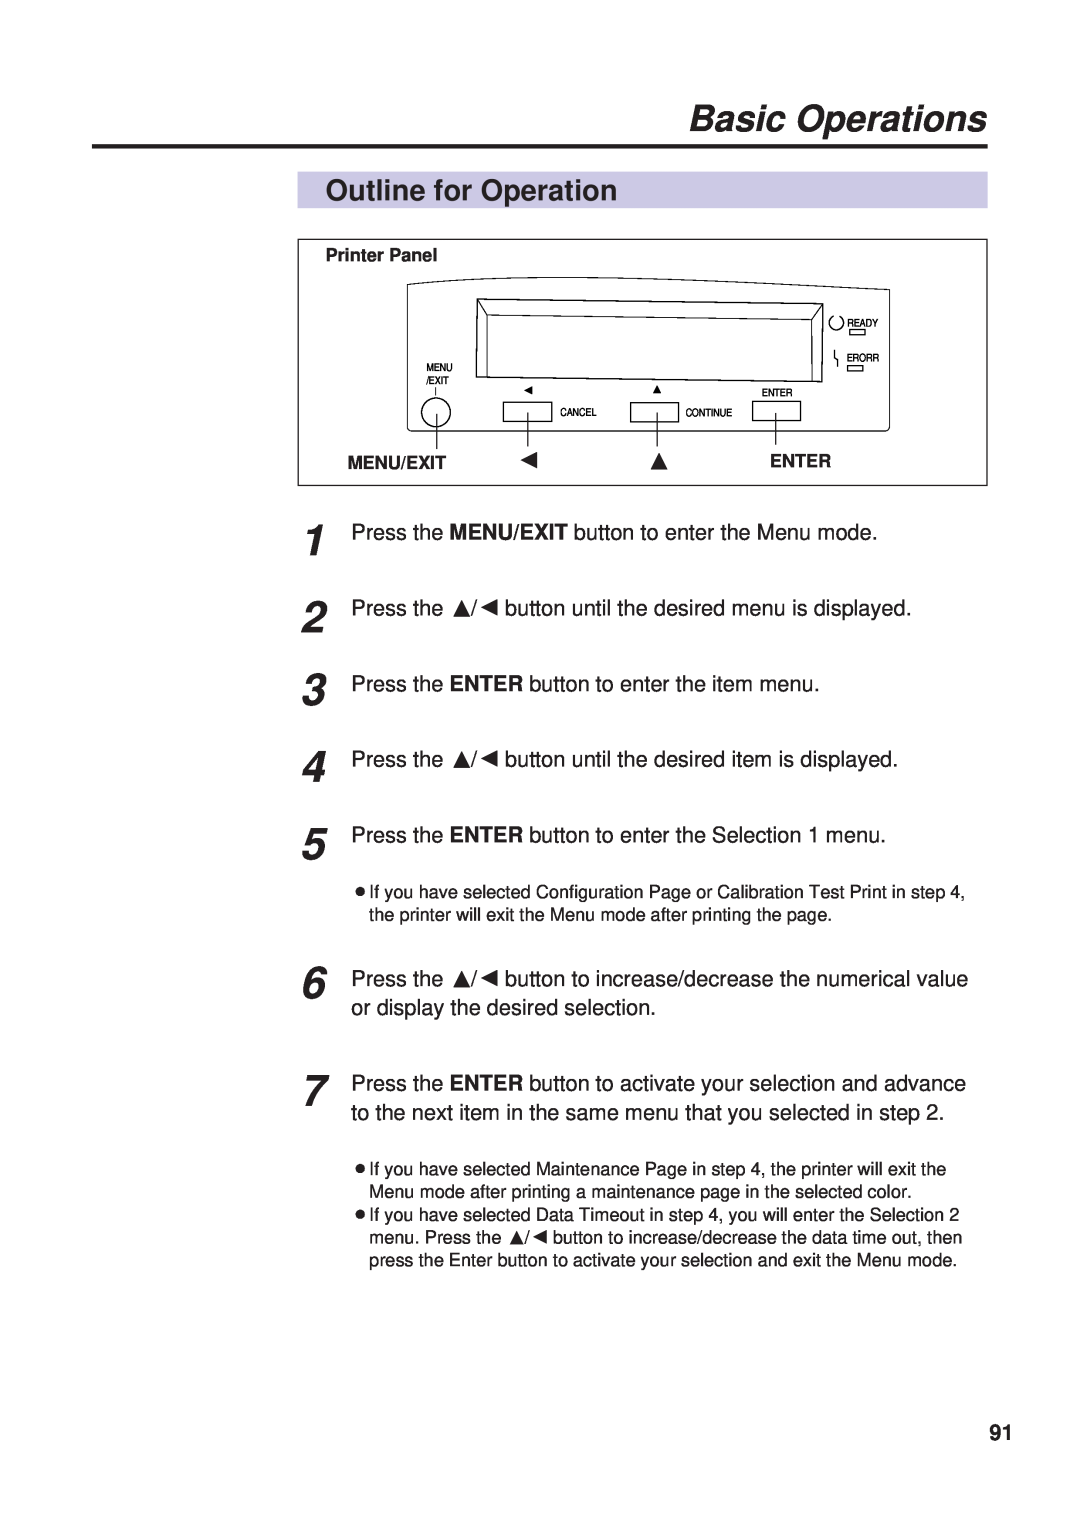 Panasonic KX-PS8000 manual Basic Operations, Outline for Operation 